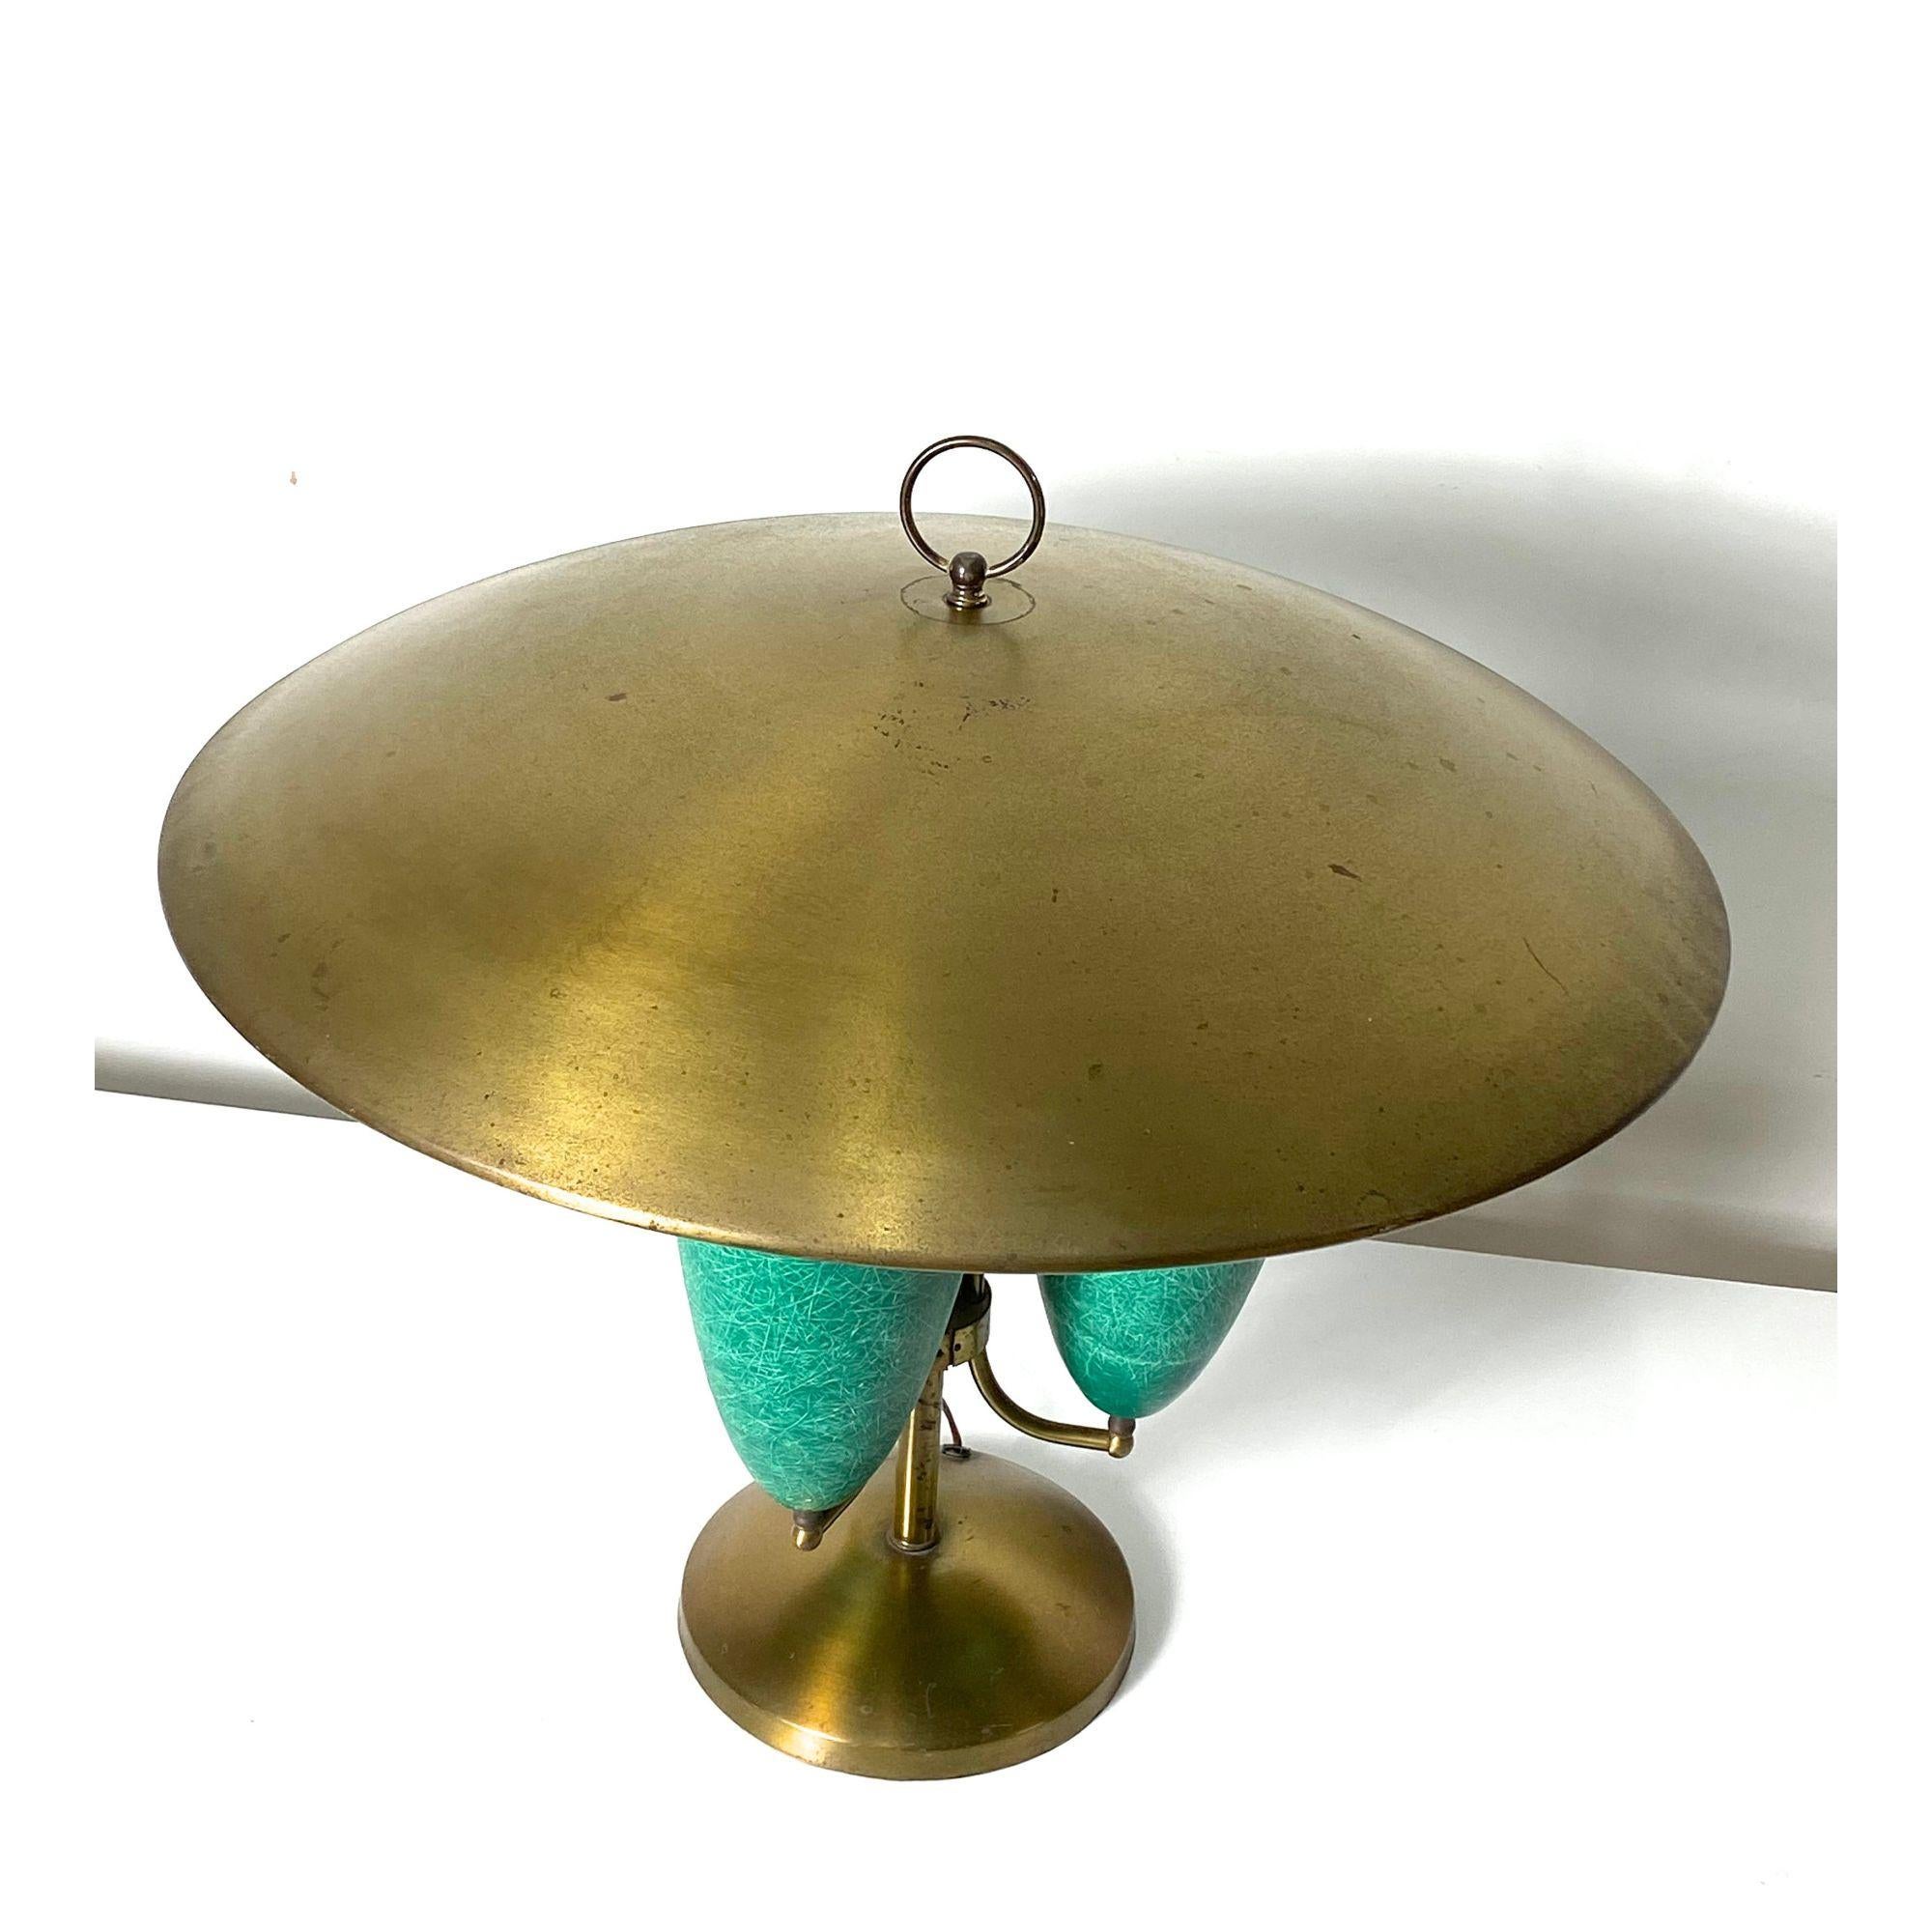 20th Century Large Mid Century Modern Canopy Table Lamp in Fiberglass and Brass, circa 1950's For Sale